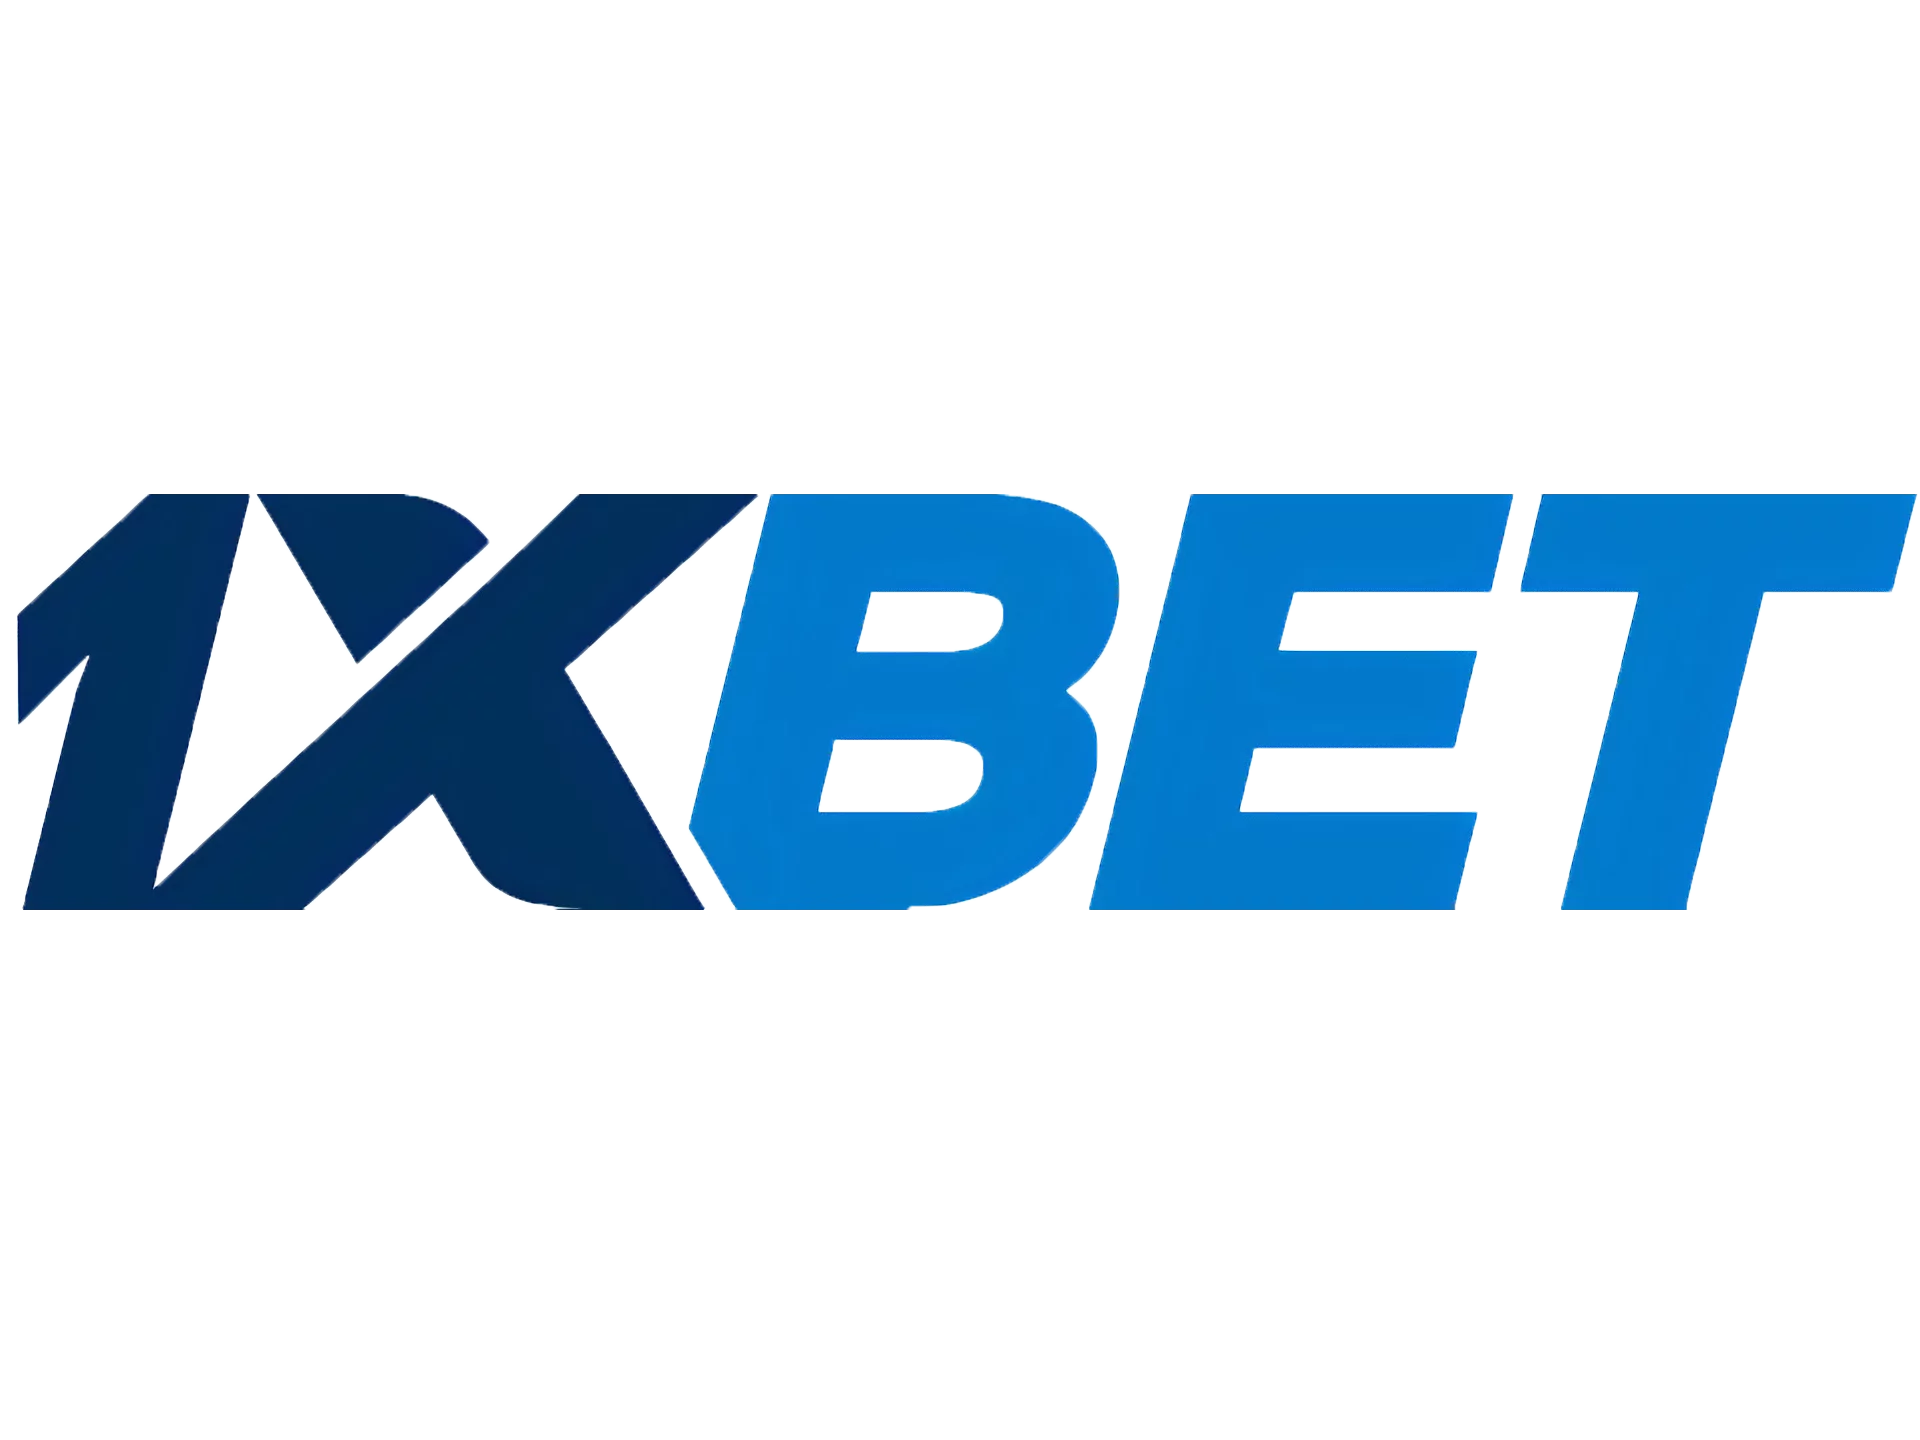 Watch a detailed video review of 1xBet for Indian users.